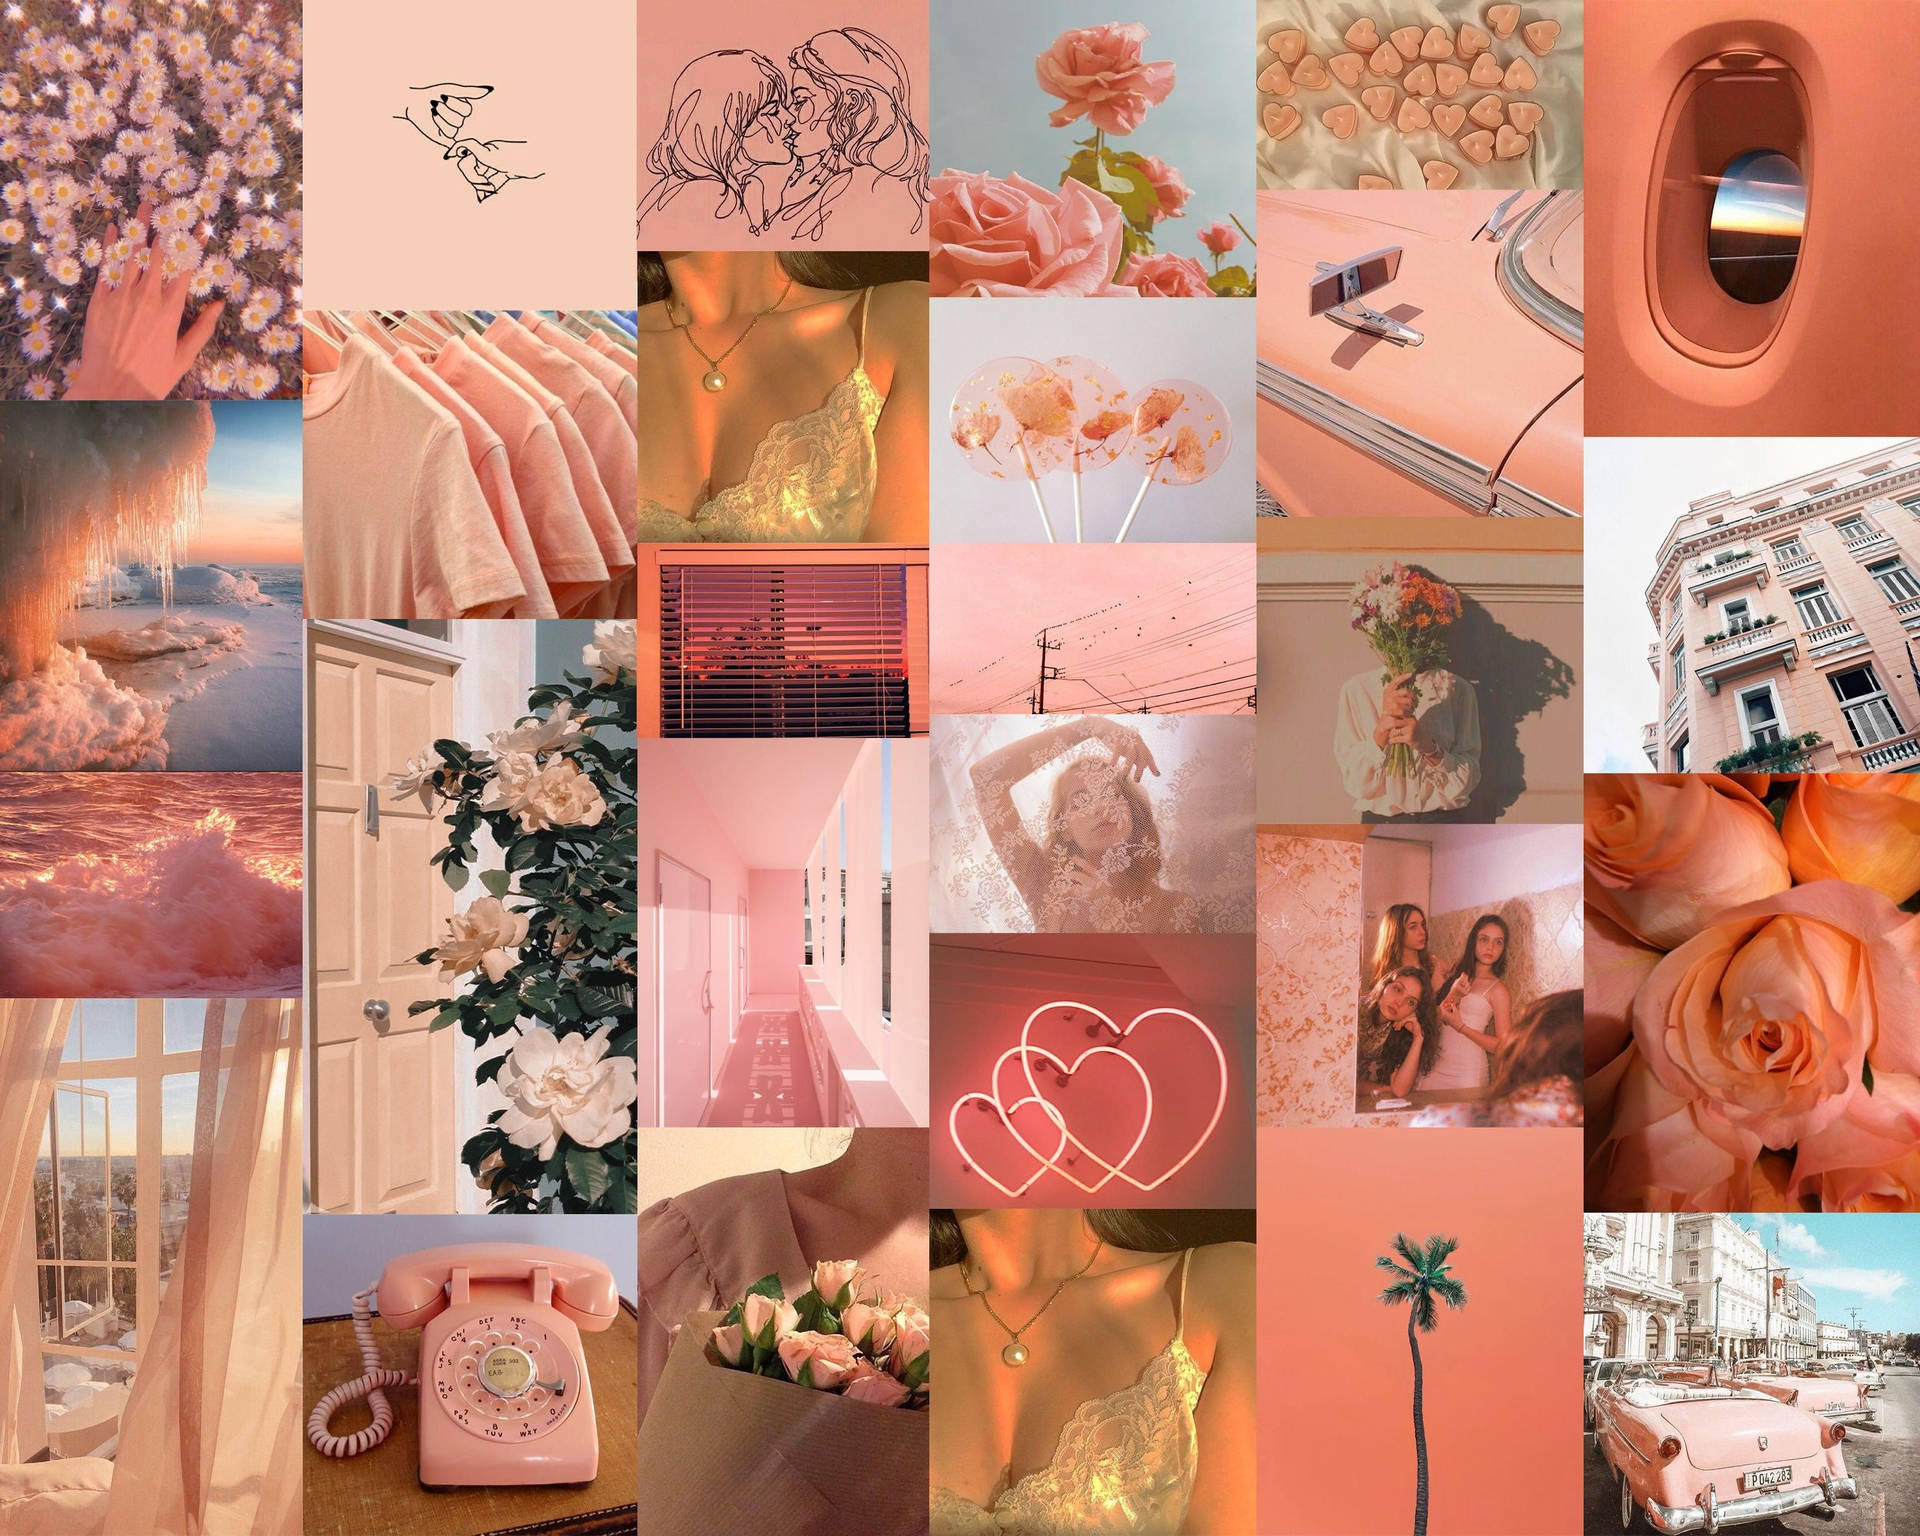 Download A Collage Of Photos With Pink And White Colors Wallpaper   Wallpaperscom